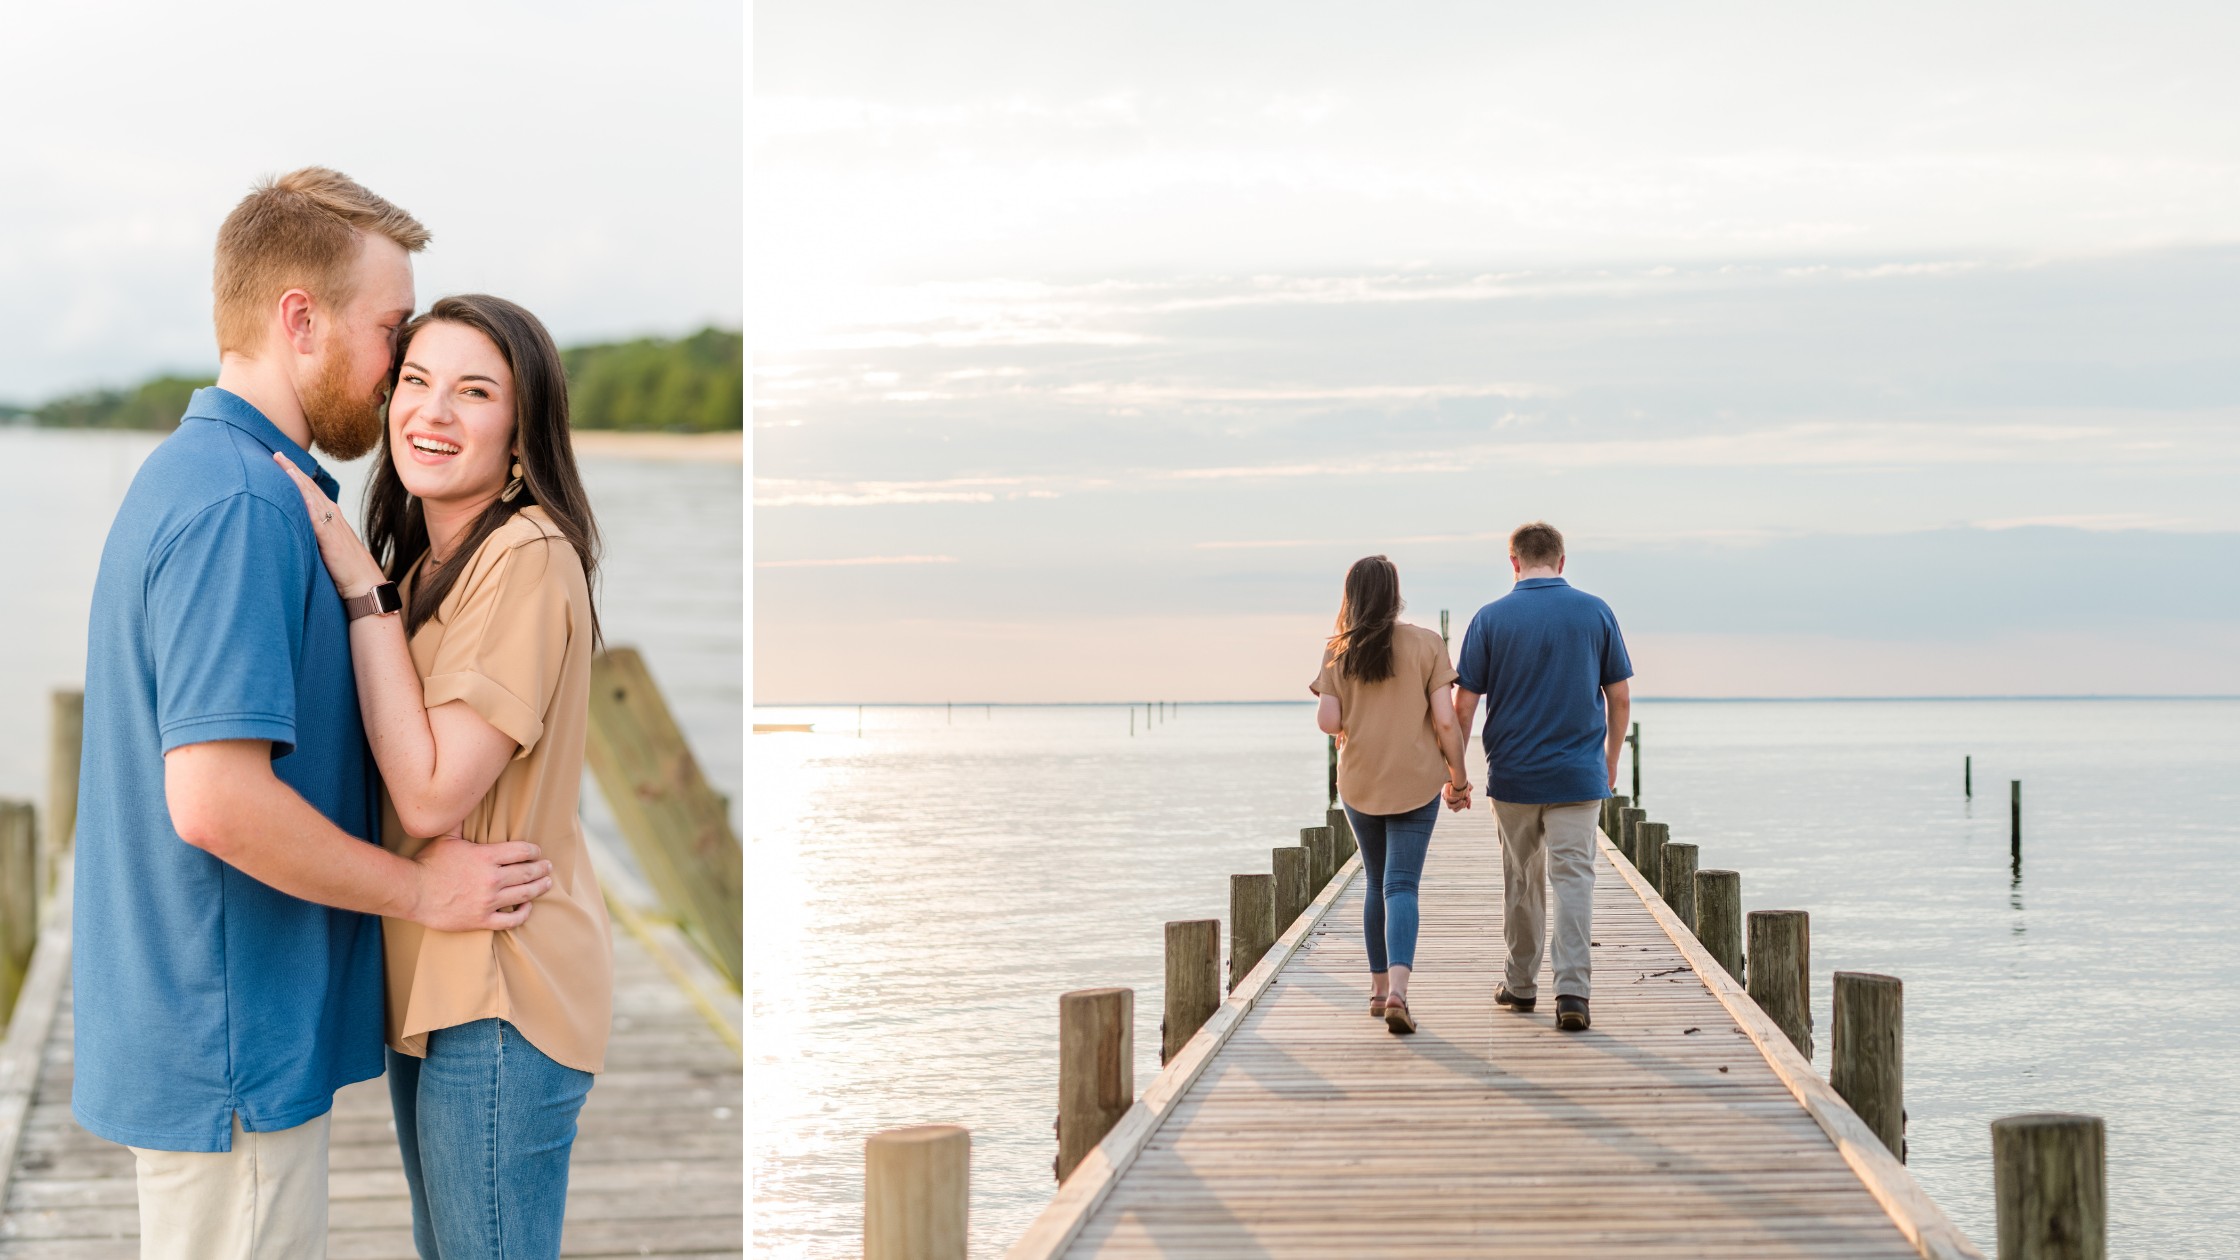 August Fairhope Pier Engagement Session Photography Photographed by Kristen Marcus Photography